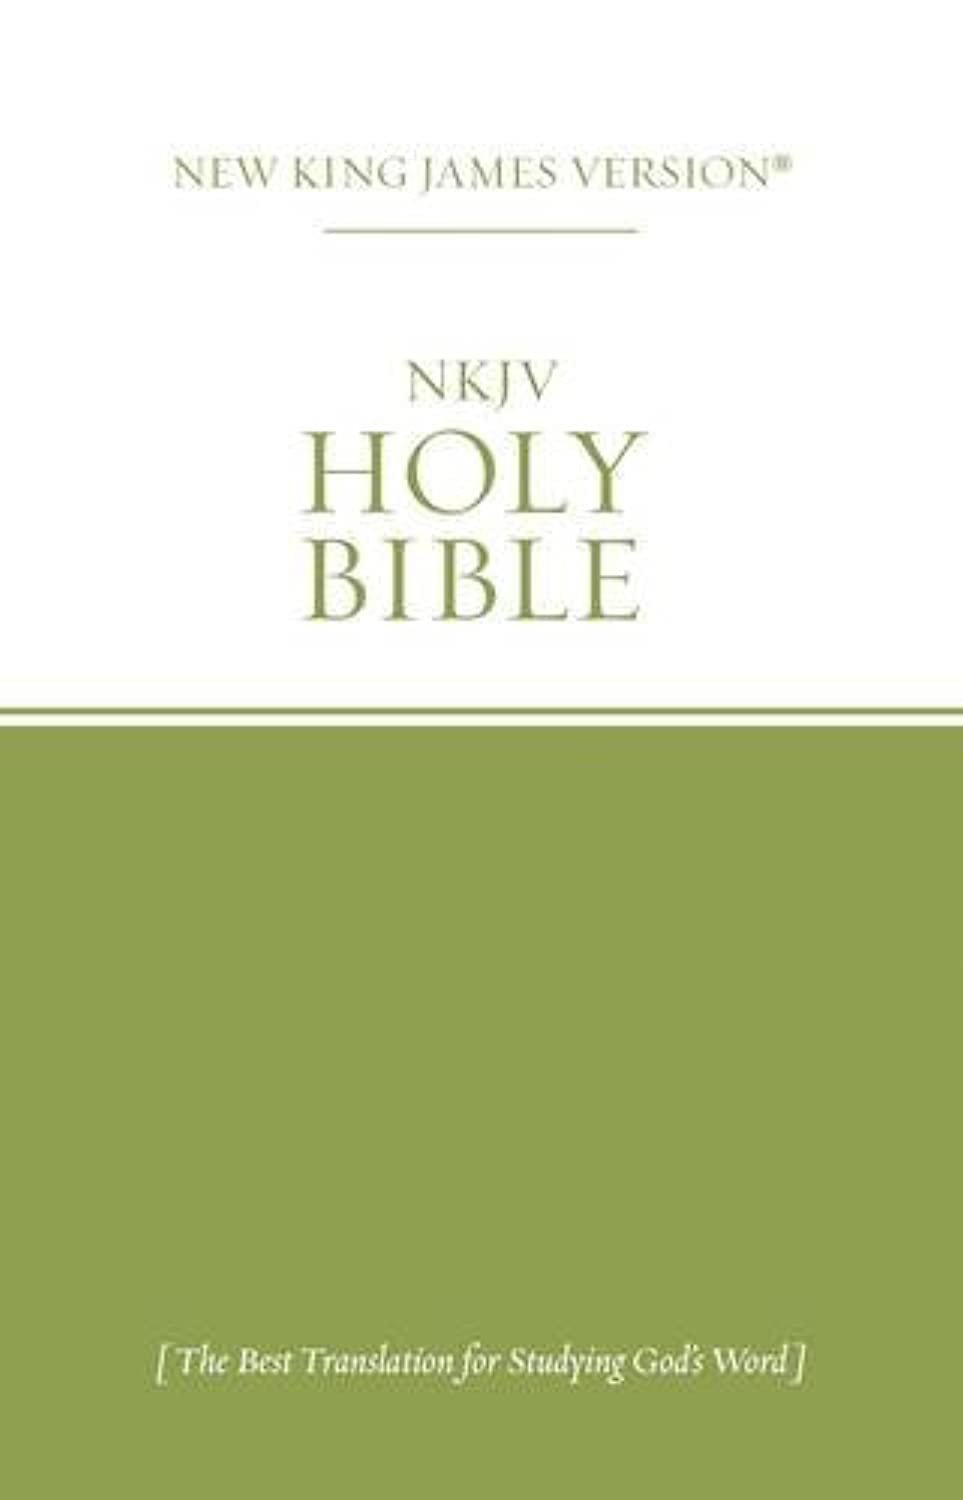 The Holy Bible: New King James Version